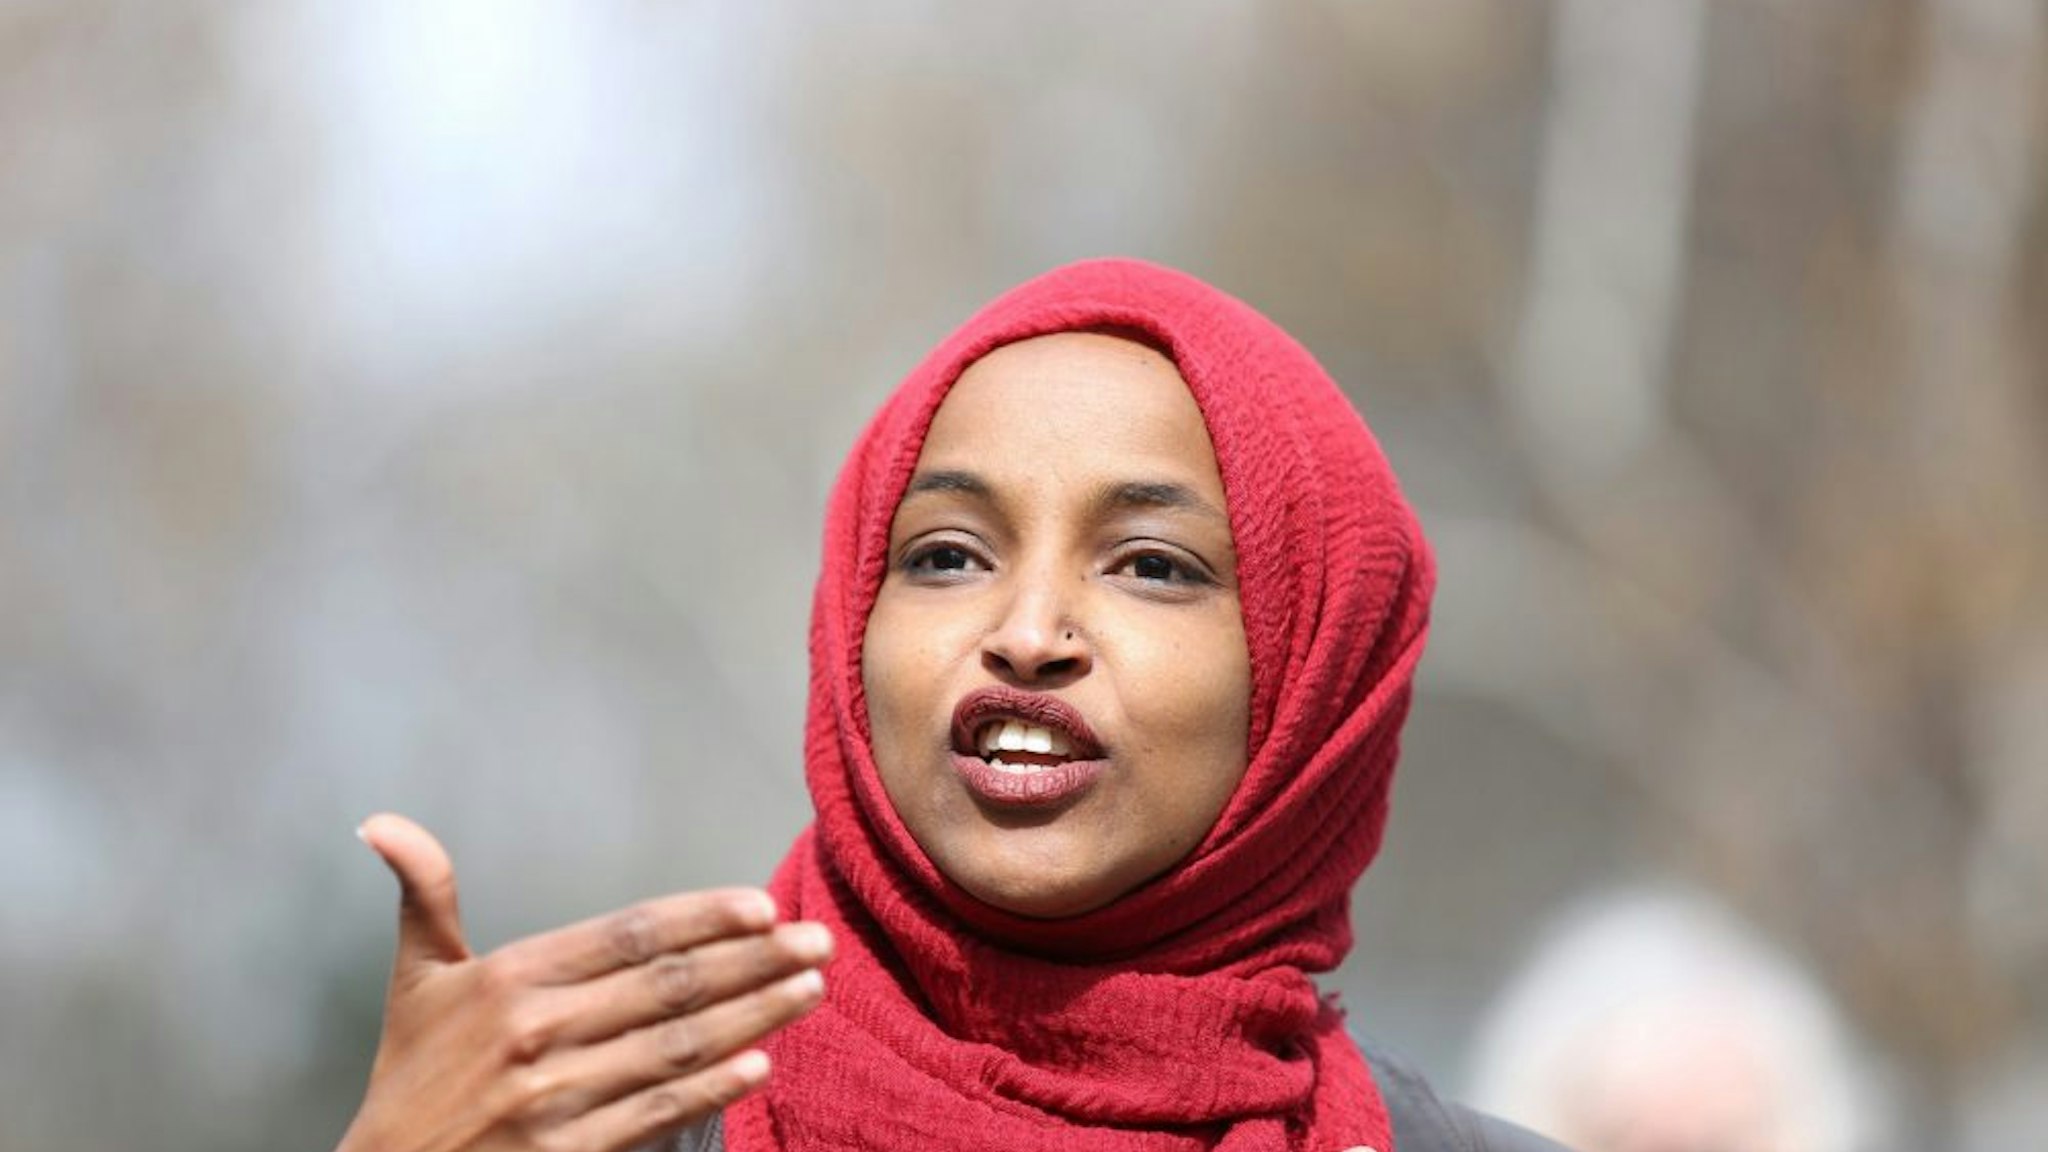 Representative Ilhan Omar, a Democrat from Minnesota, speaks during a press conference near the site of Daunte Wright's death in Brooklyn Center, Minnesota, U.S., on Tuesday, April 20, 2021. The case of the former Minneapolis police officer accused of killing George Floyd went to the jury after Derek Chauvin's defense attorney said the viral video of him kneeling on Floyd's neck and back doesn't tell the entire story.